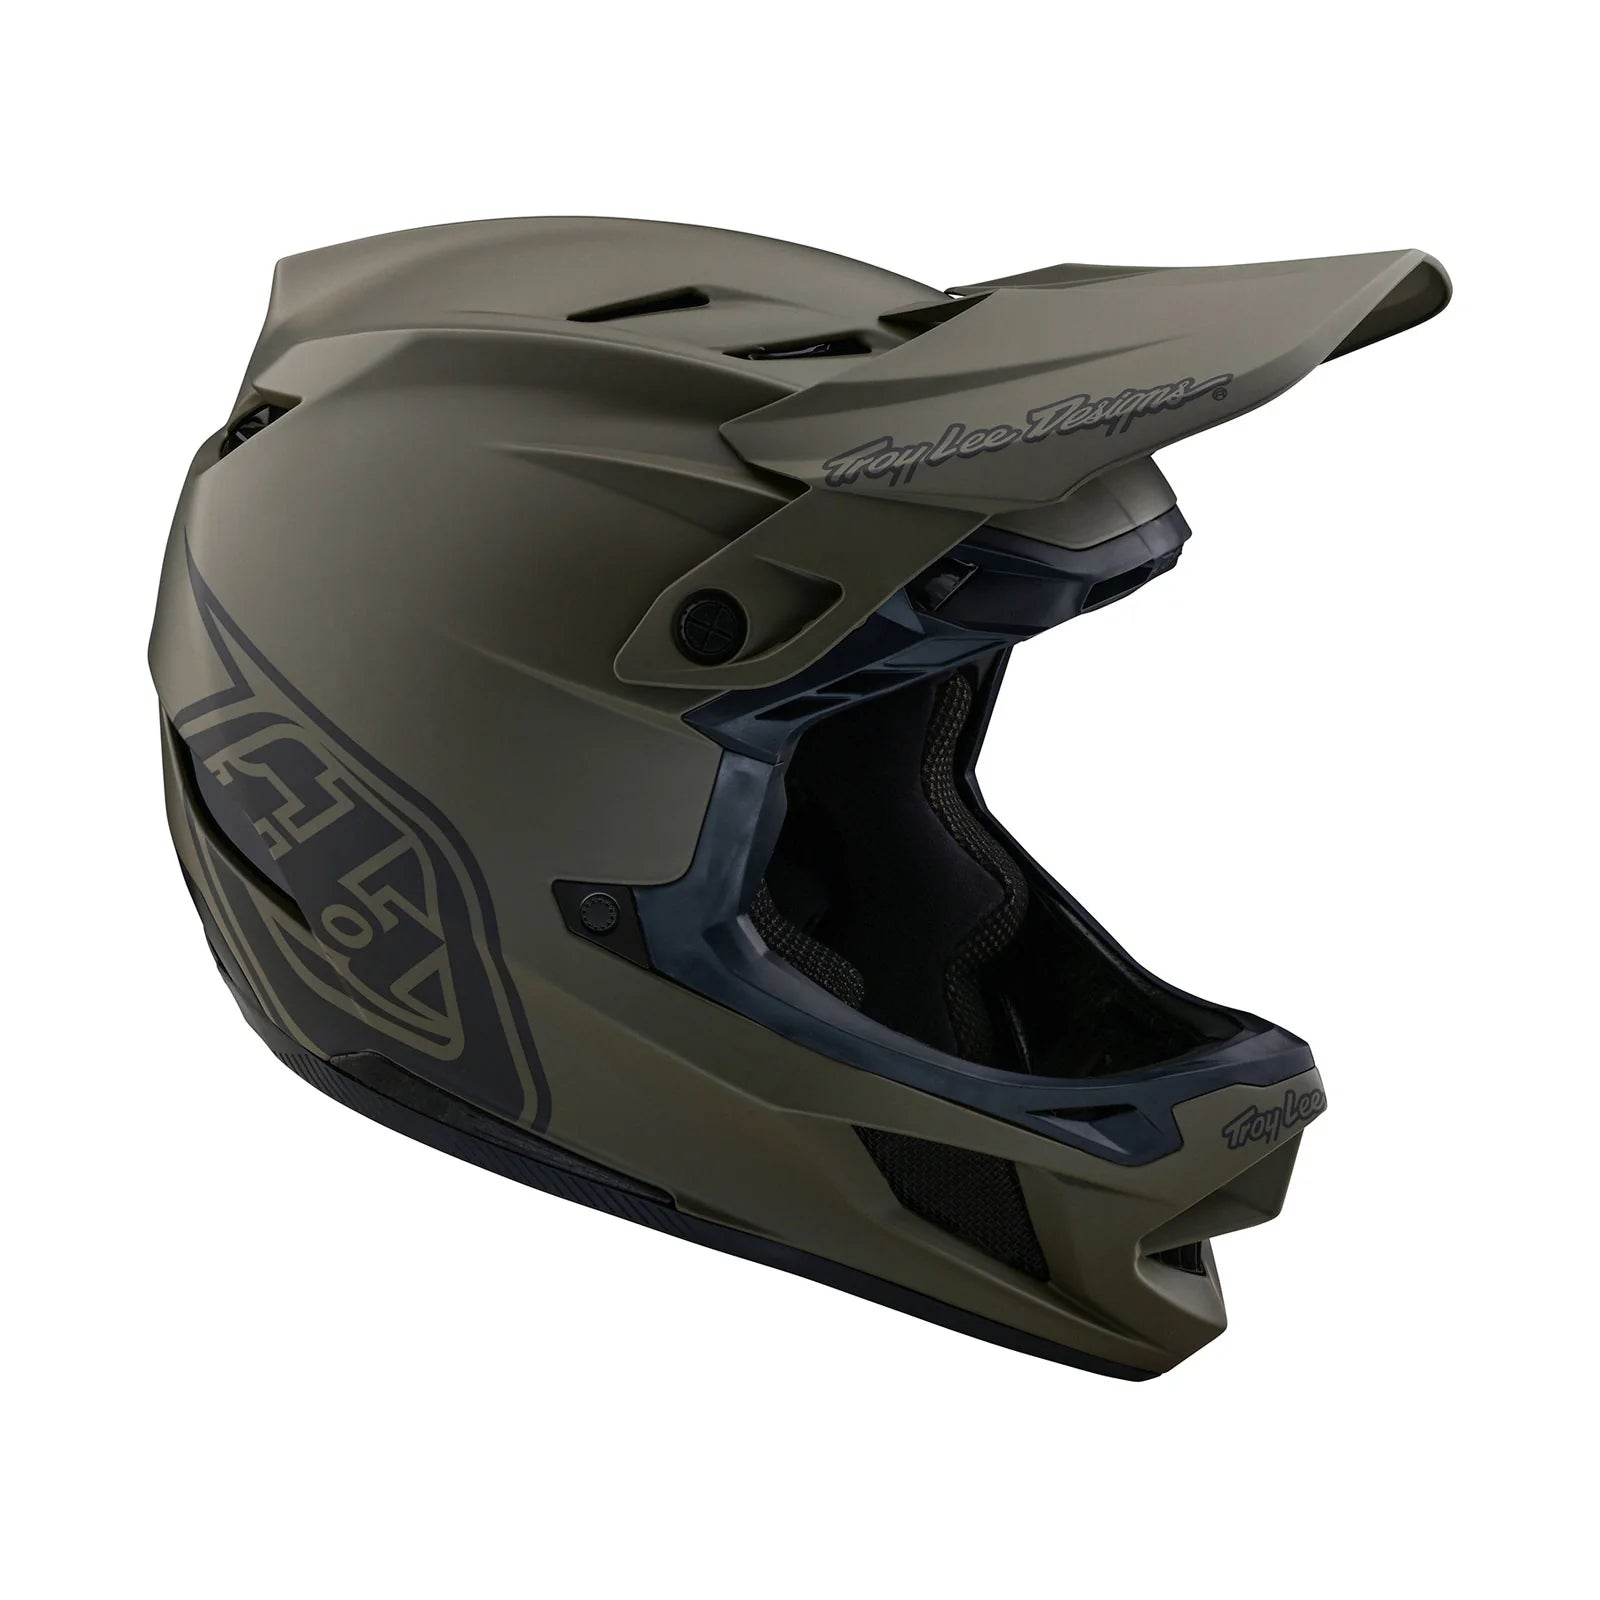 The TLD D4 AS Composite Helmet W/MIPS Stealth Tarmac, featuring the Mips protection system, is shown on a white background.